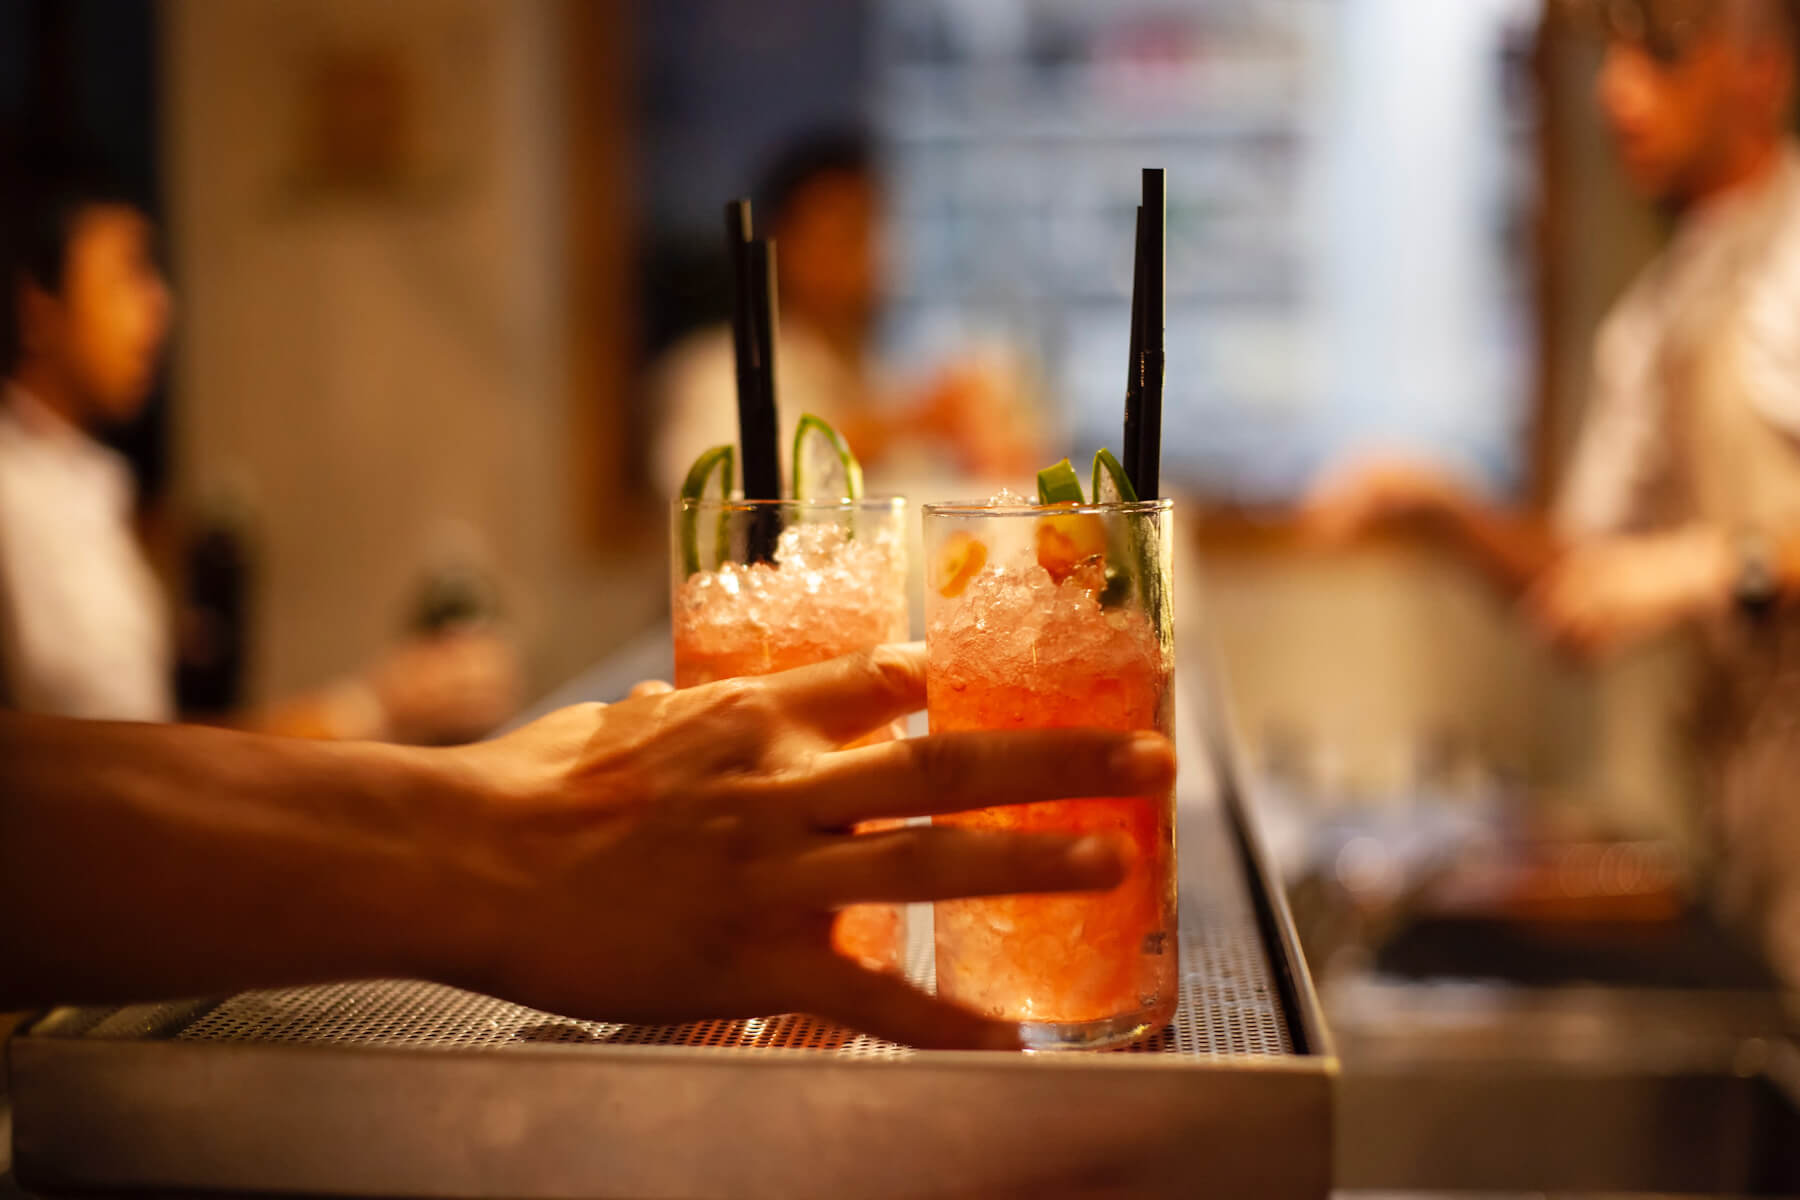 Best Drinks For Events To Have For Staff